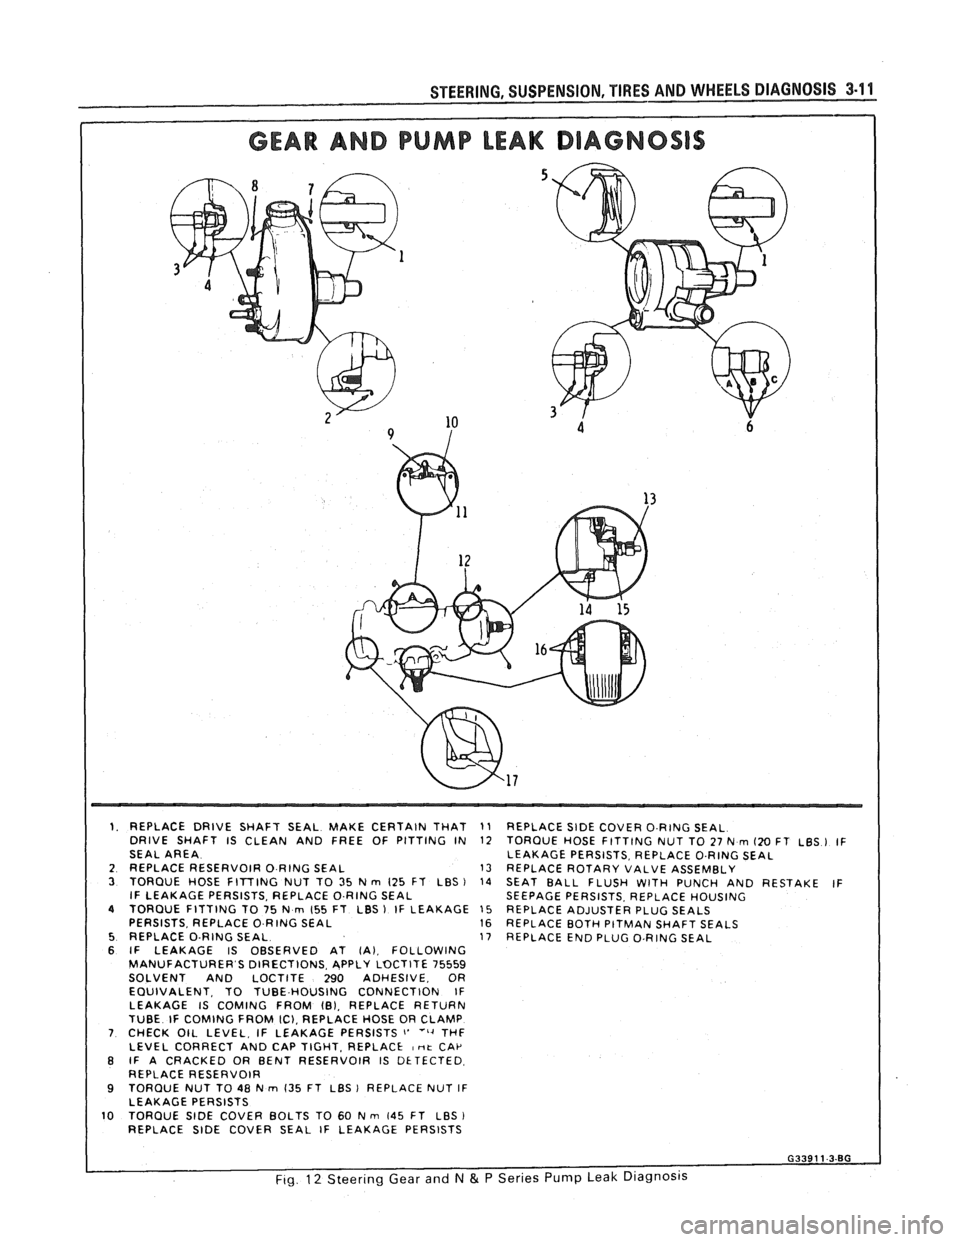 PONTIAC FIERO 1988  Service Repair Manual 
1. REPLACE DRIVE  SHAFT  SEAL MAKE  CERTAIN  THAT 
DRIVE  SHAFT  IS CLEAN  AND FREE  OF  PITTING  IN 
SEAL  AREA 
2  REPLACE RESERVOIR 
0 RING SEAL 3 TORQUE  HOSE FITTING  NUT TO 35 N rn 125  FT  LBS